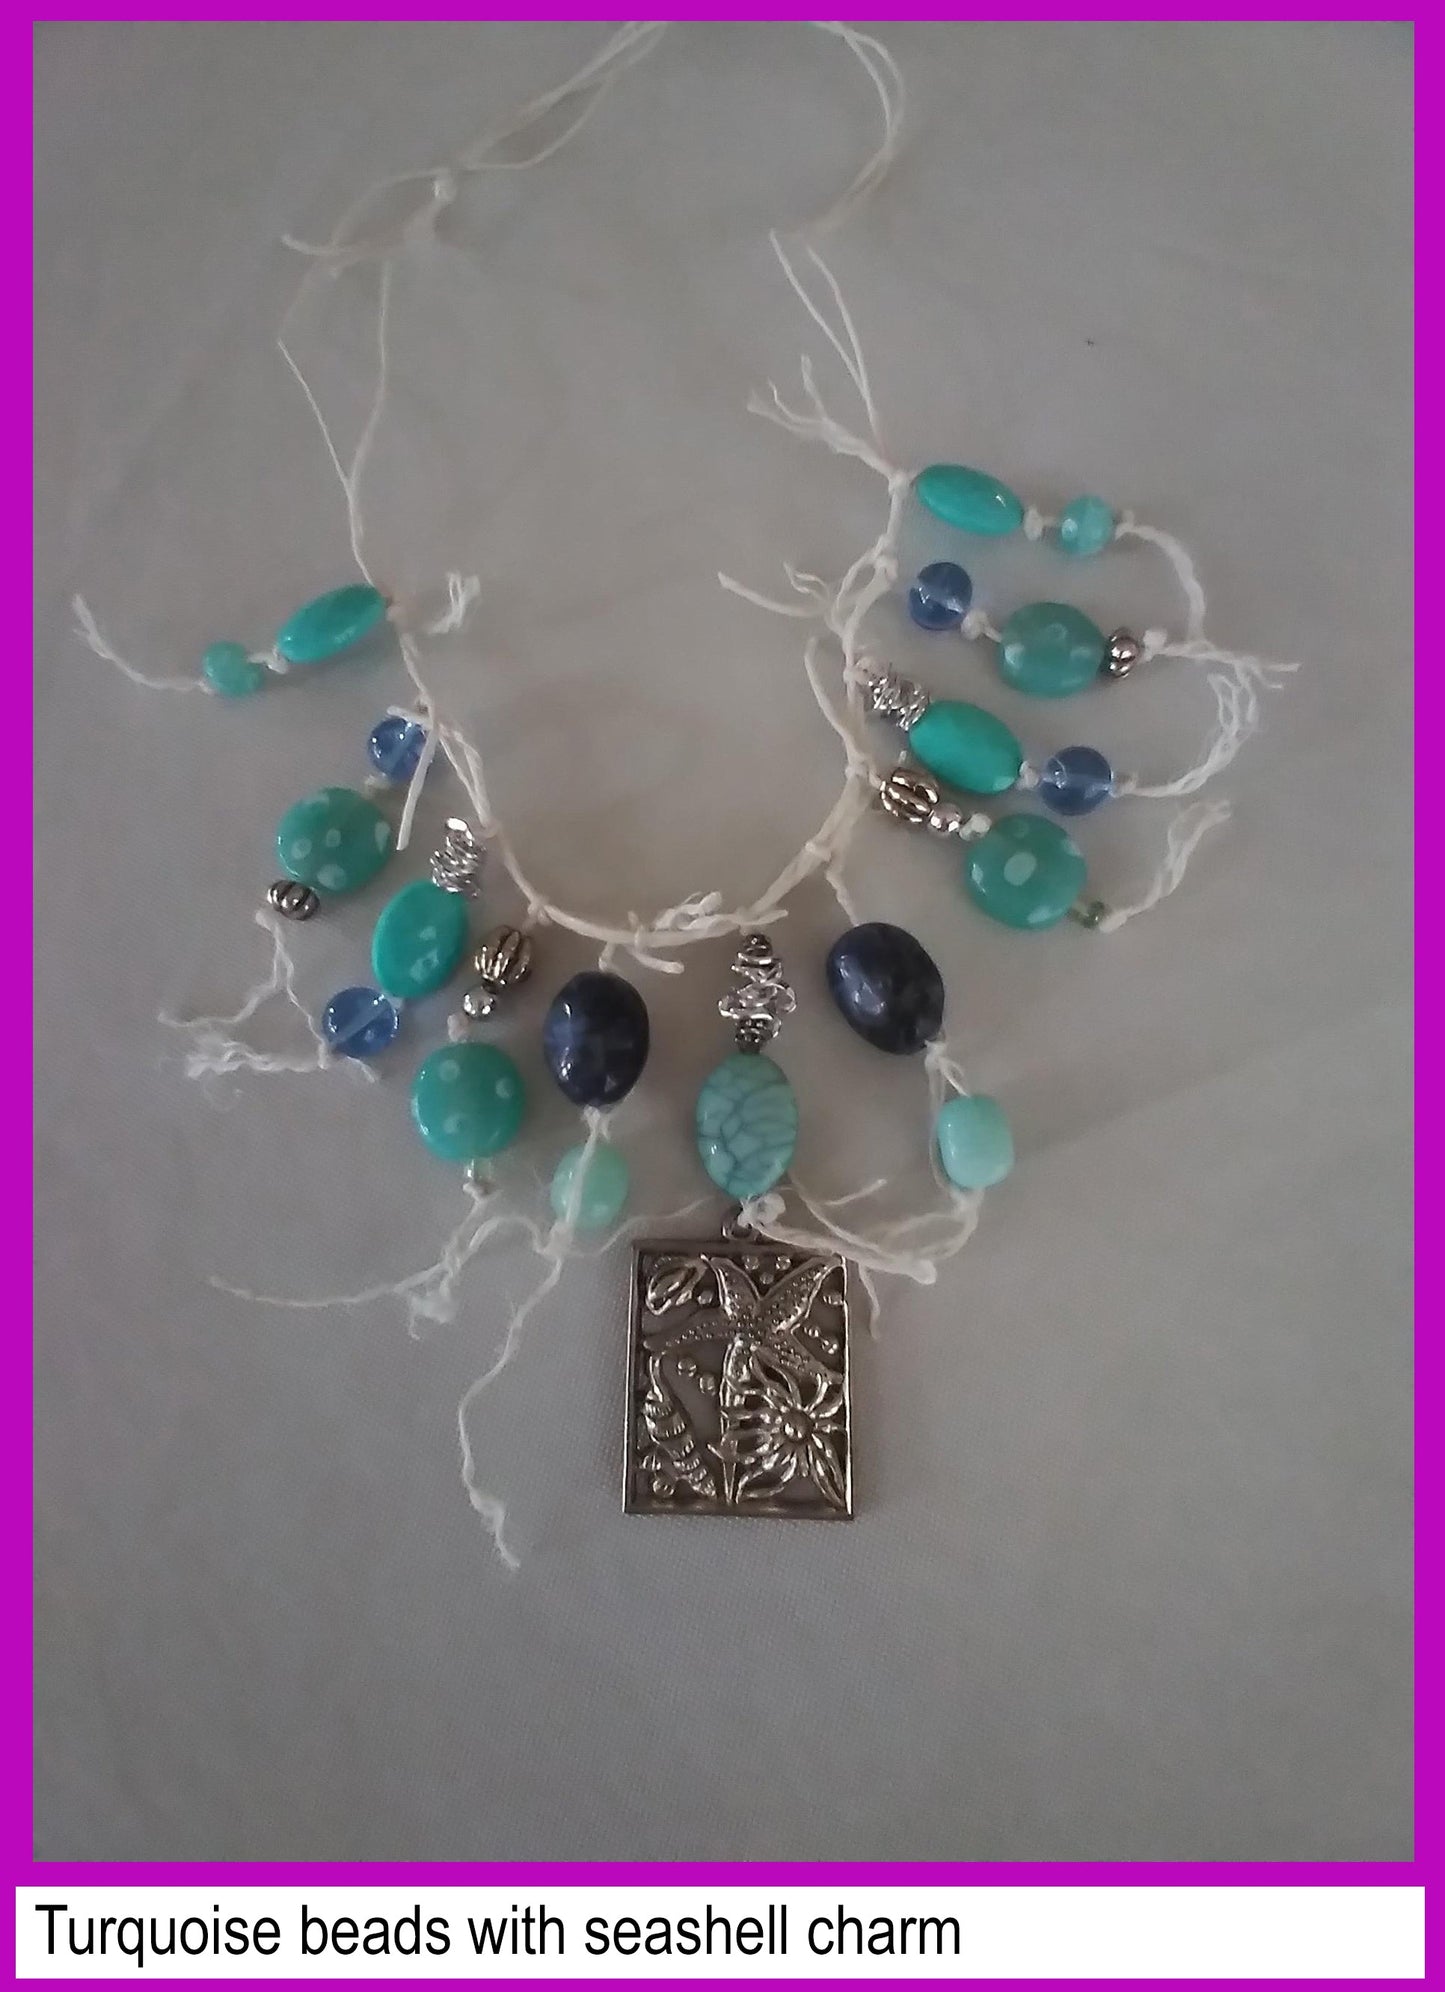 Turquoise beads with Seashell charm string necklace